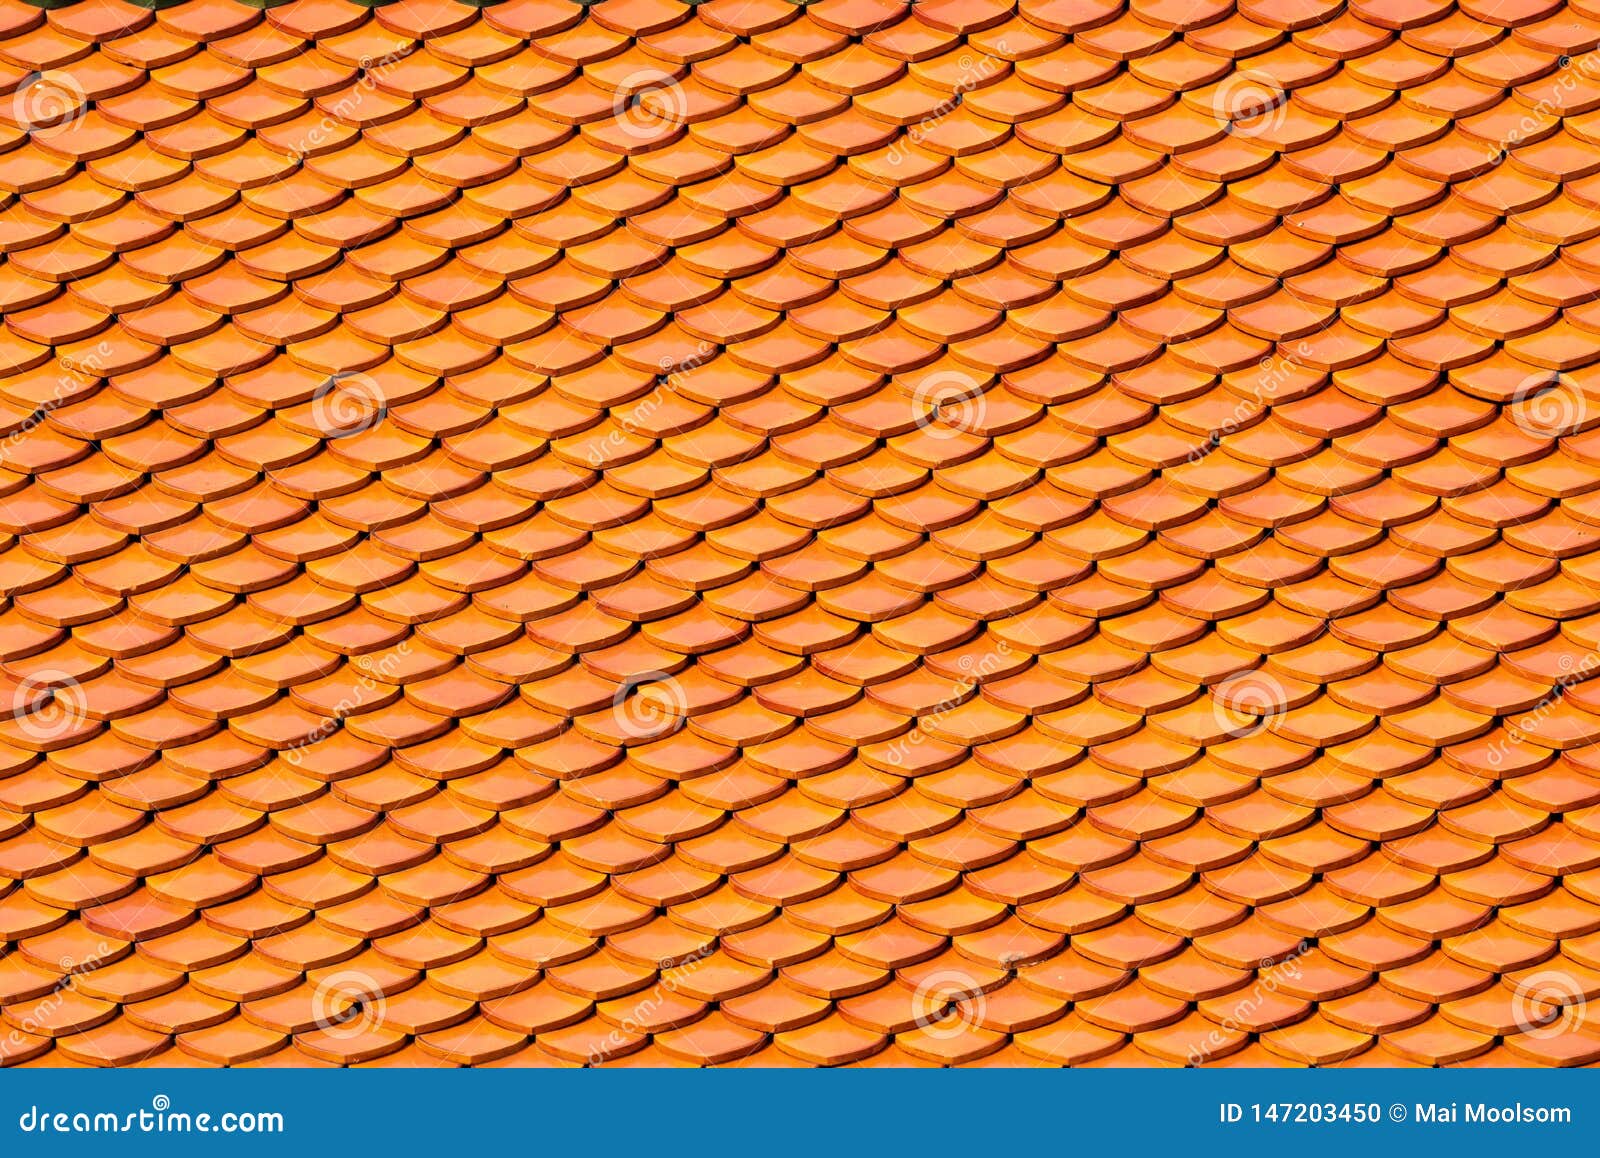 Tiles Textures on the Roof Top, Old Castle,Thai Temple for Background